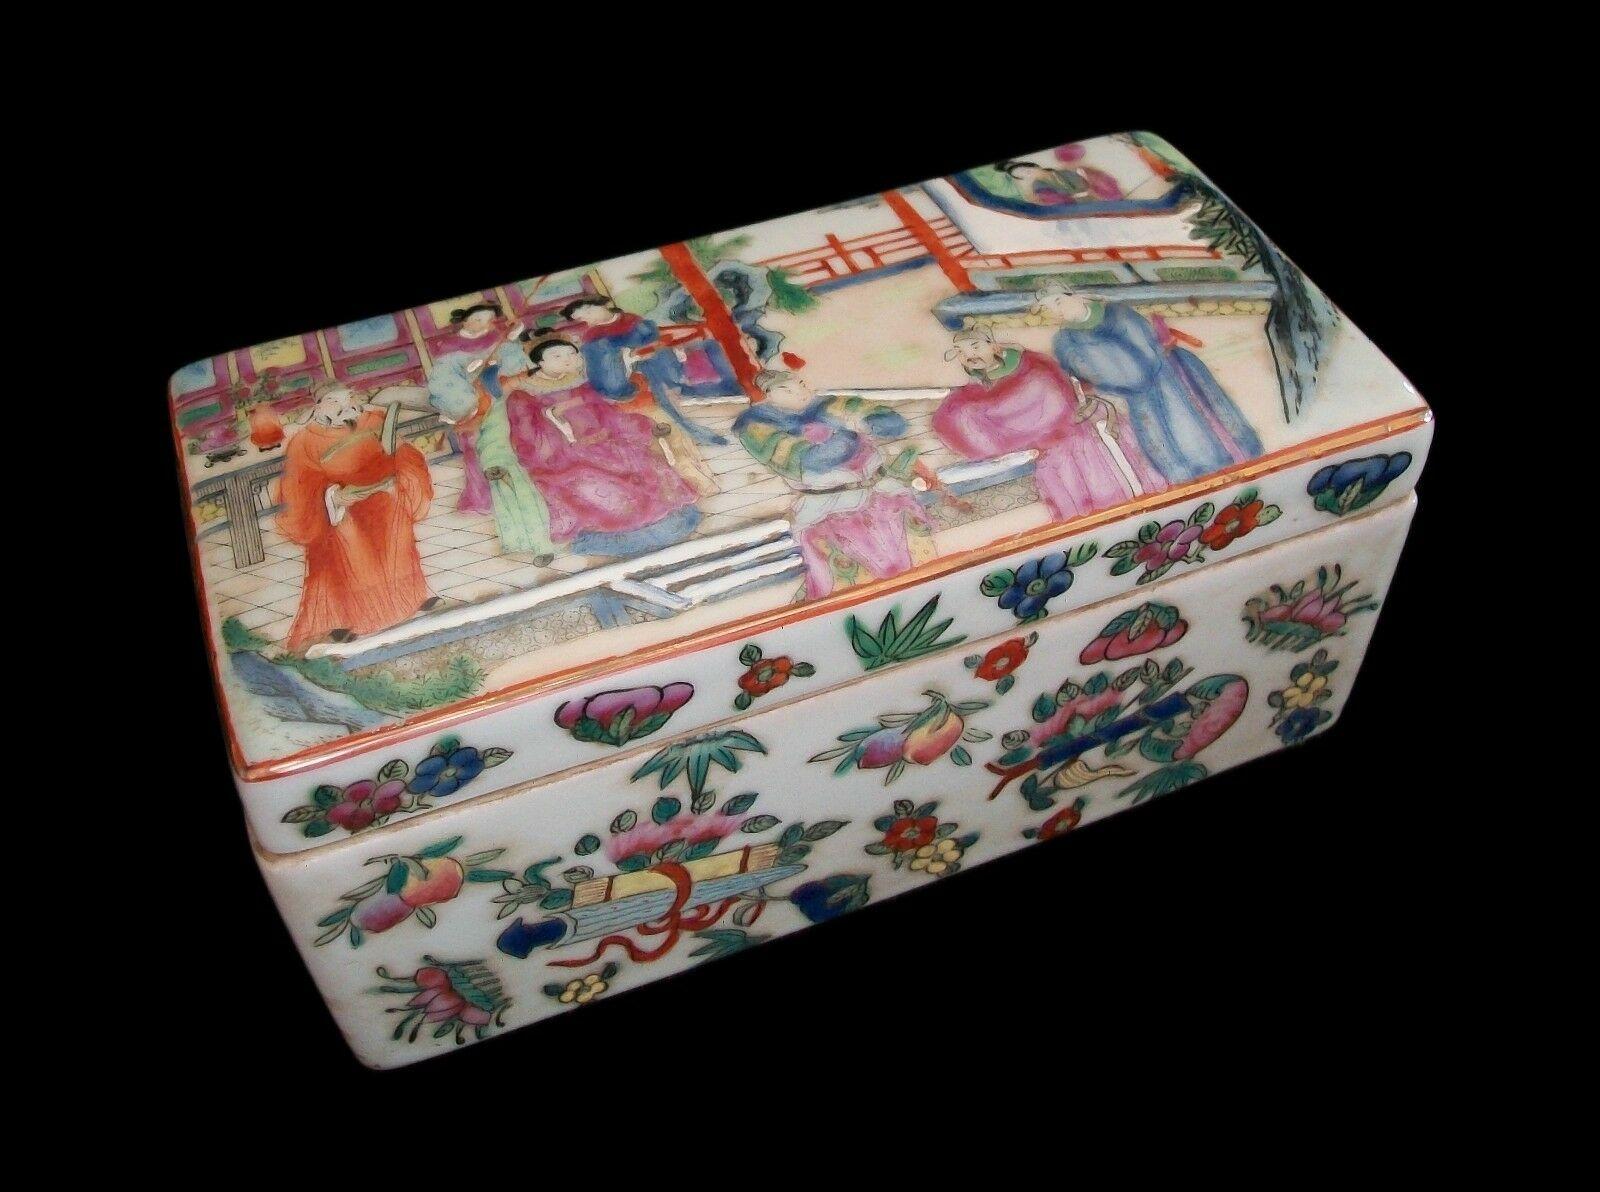 Antique Canton 'Famille Rose' porcelain box and cover - hand painted with figures in a court scene to the top and fruits and flowers to the sides - signed (red seal) - China - late 19th century.

Excellent antique condition - no loss - no damage -